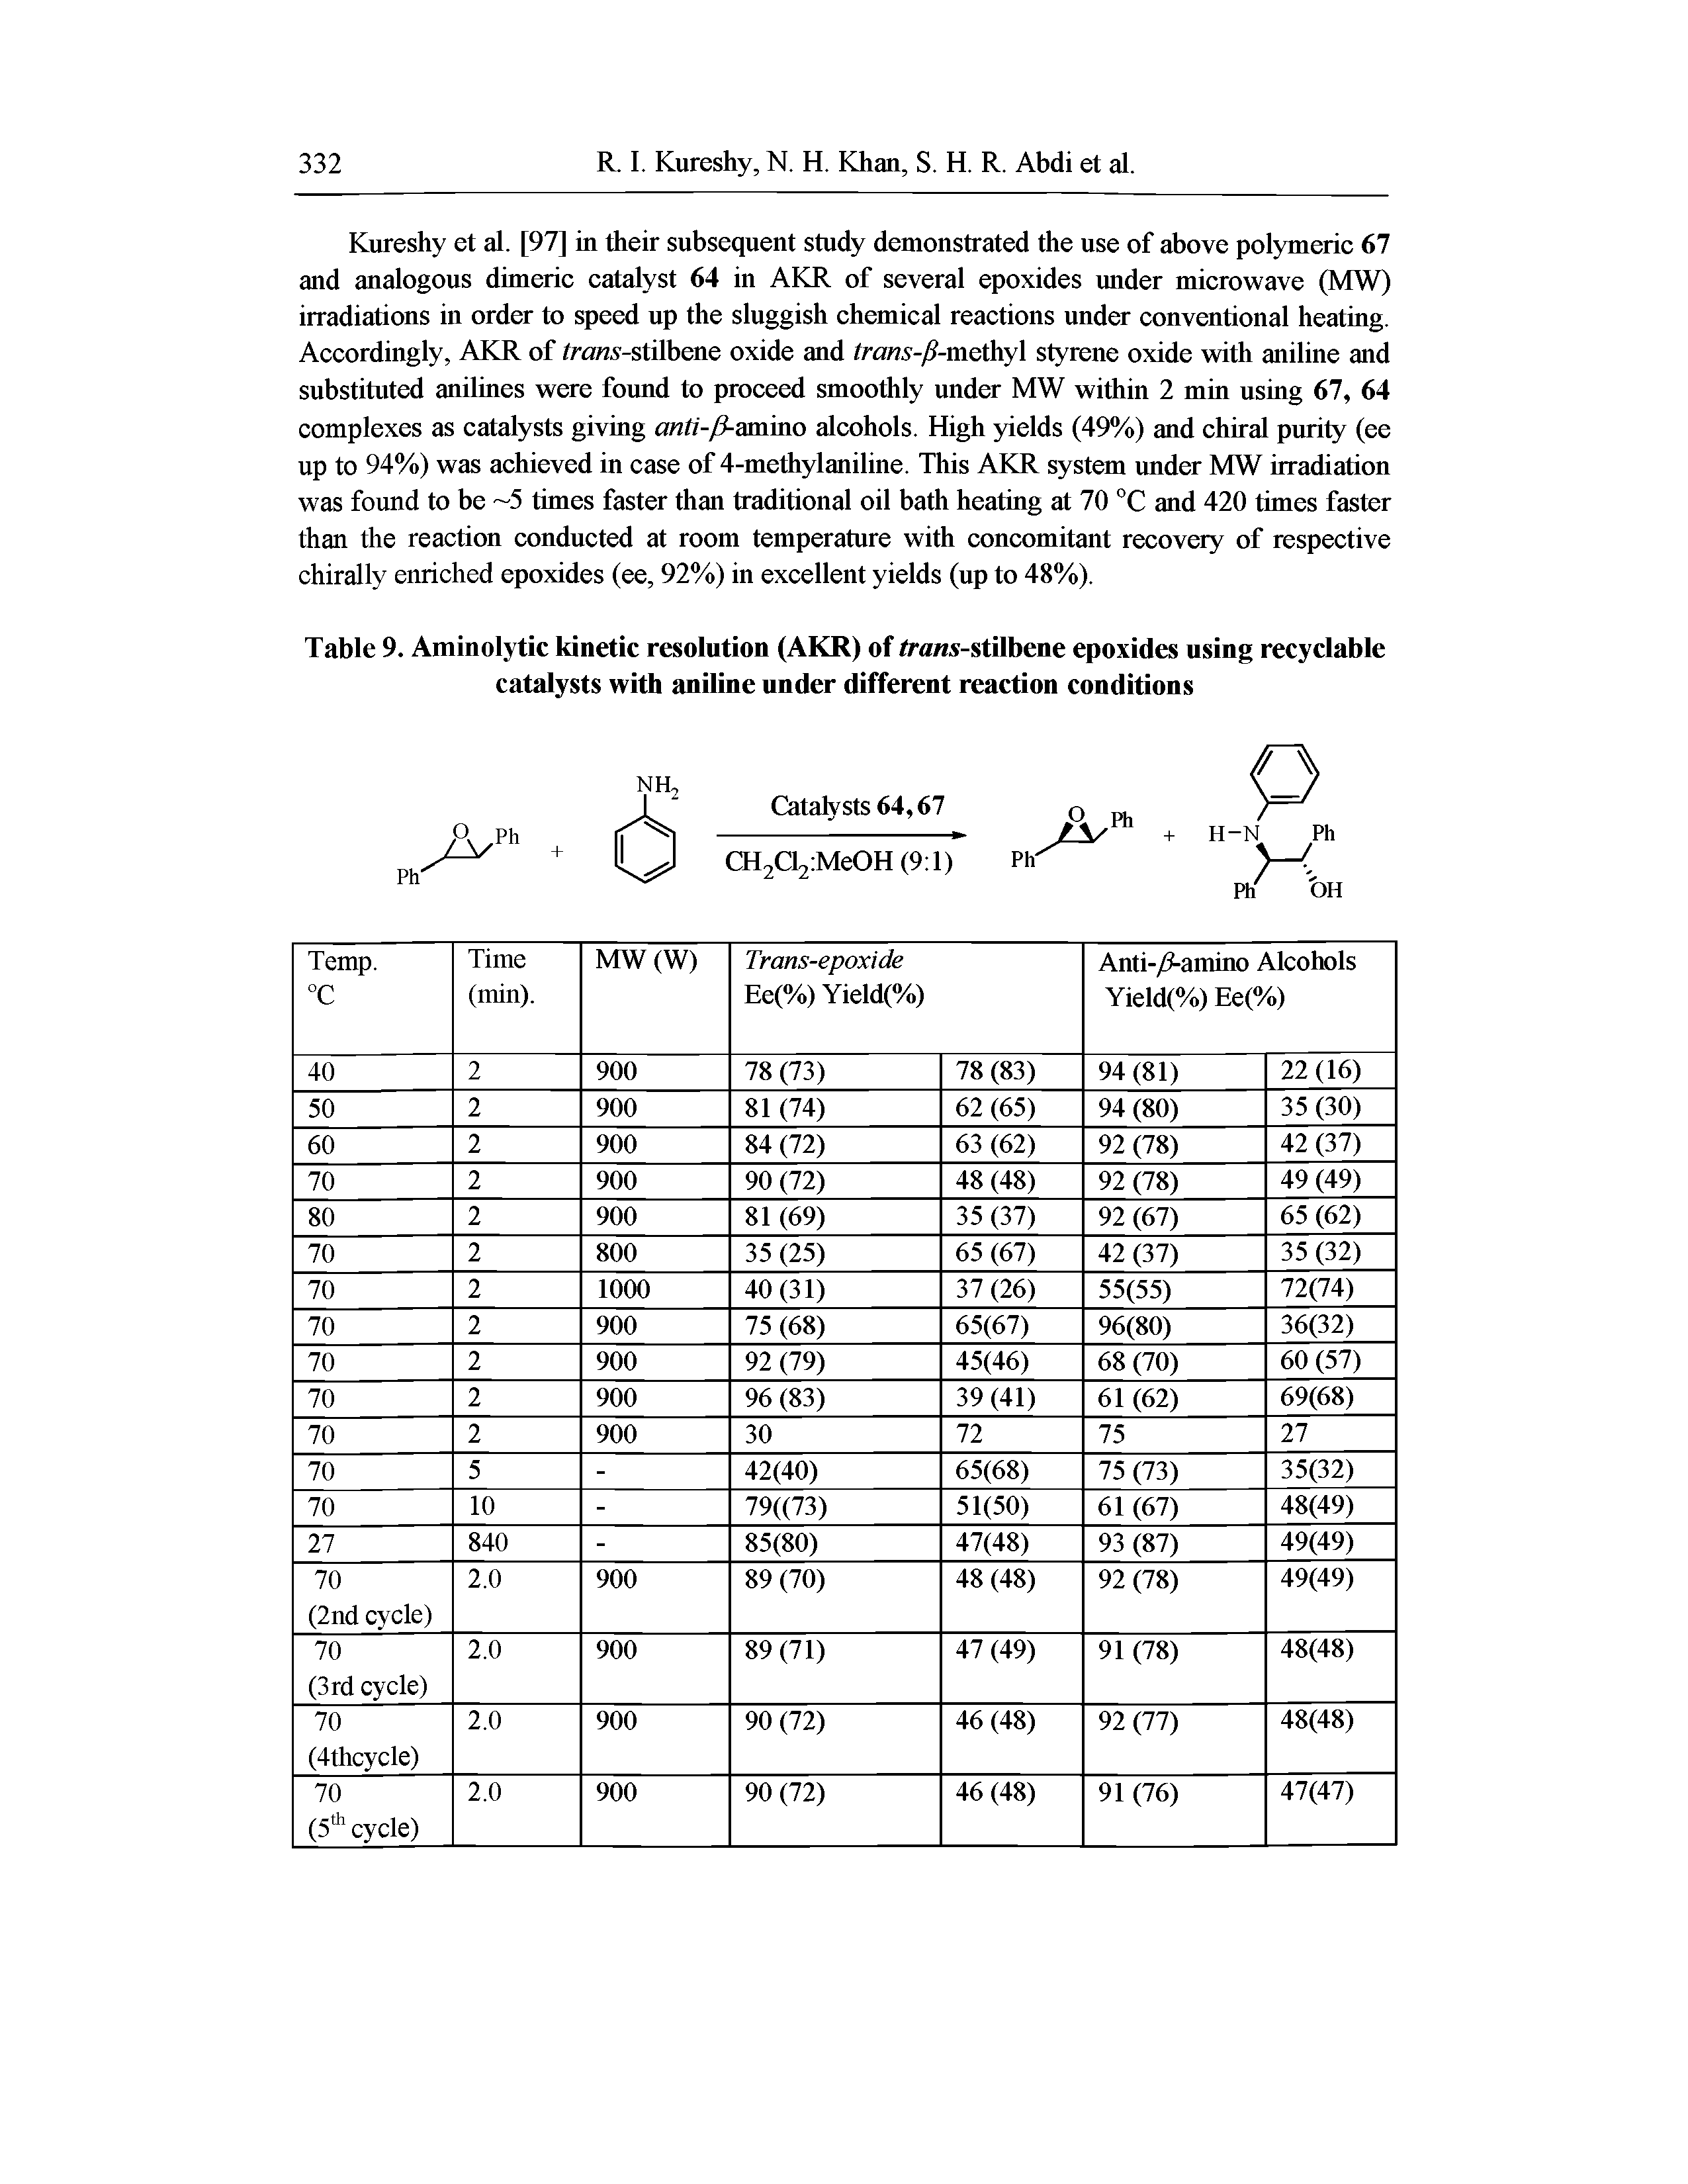 Table 9. Aminolytic kinetic resolution (AKR) of tra/is-stilbene epoxides using recyclable catalysts with aniline under different reaction conditions...